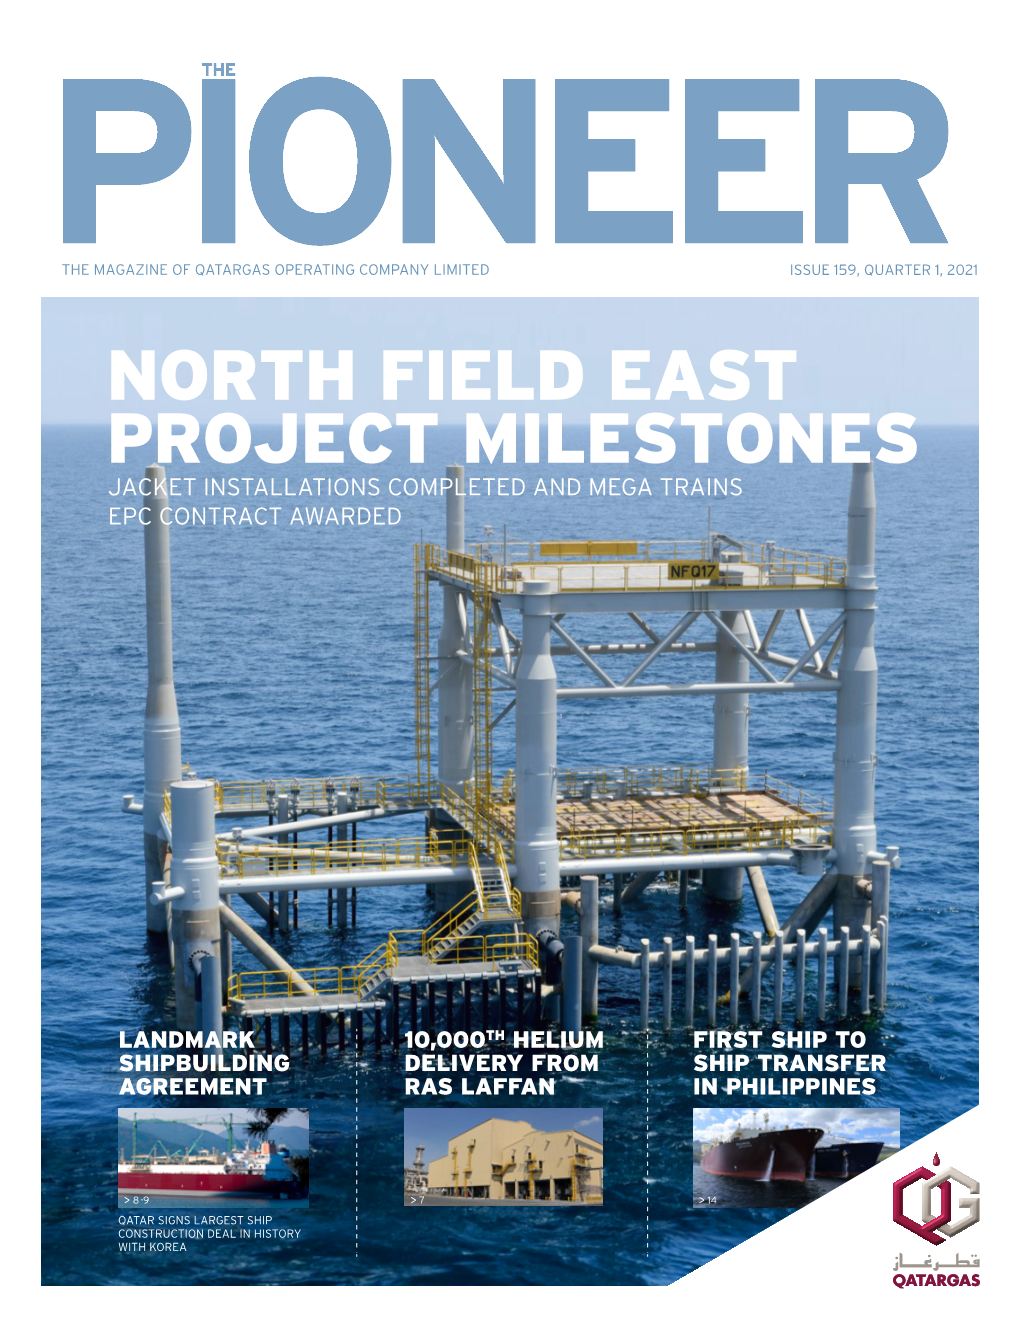 North Field East Project Milestones Jacket Installations Completed and Mega Trains Epc Contract Awarded